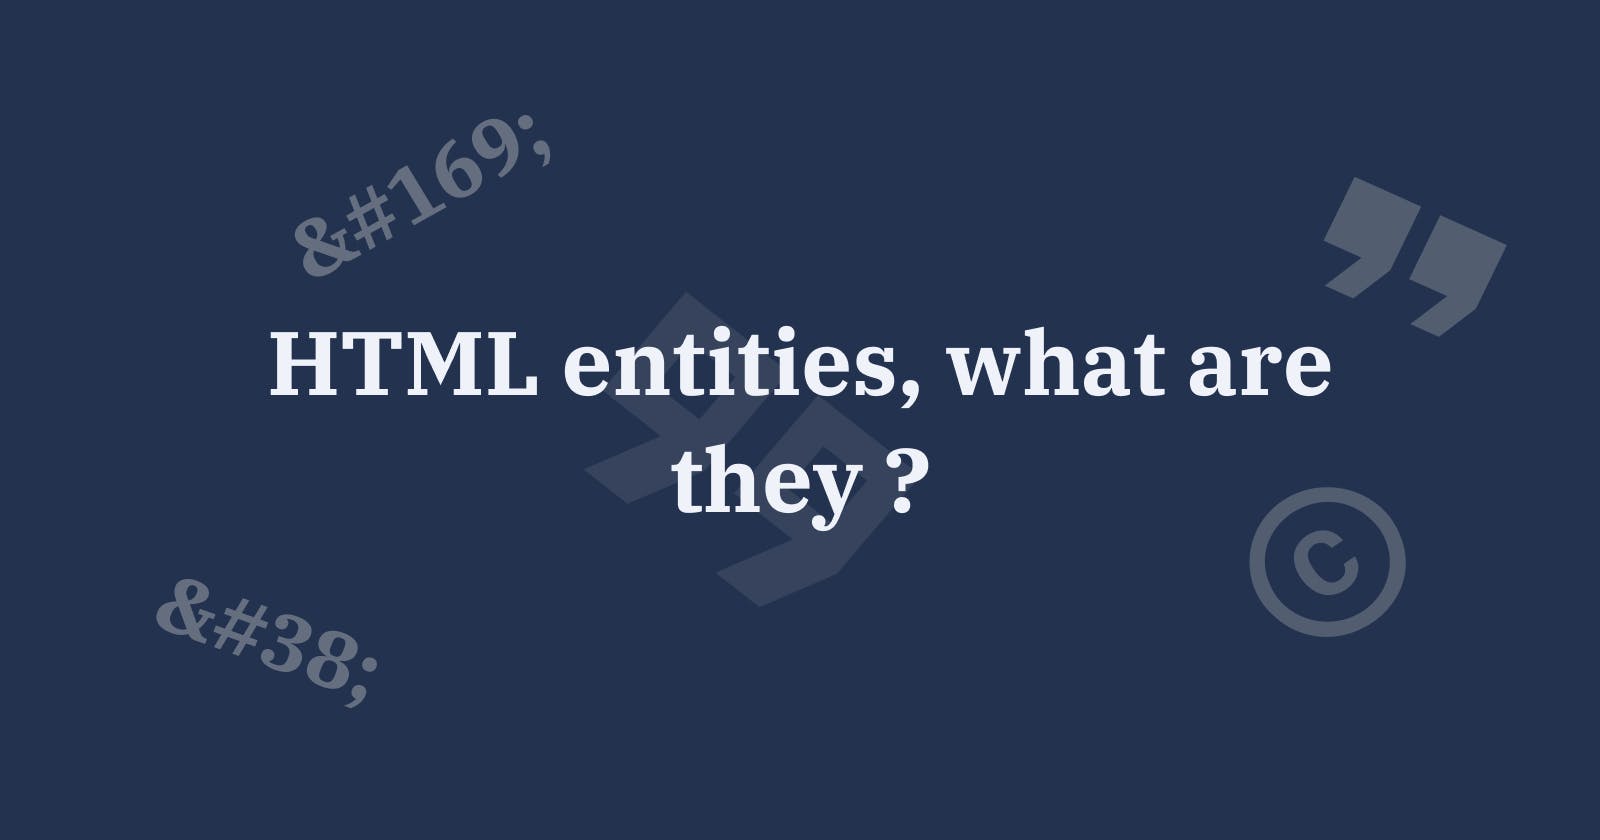 HTML entities, what are they?